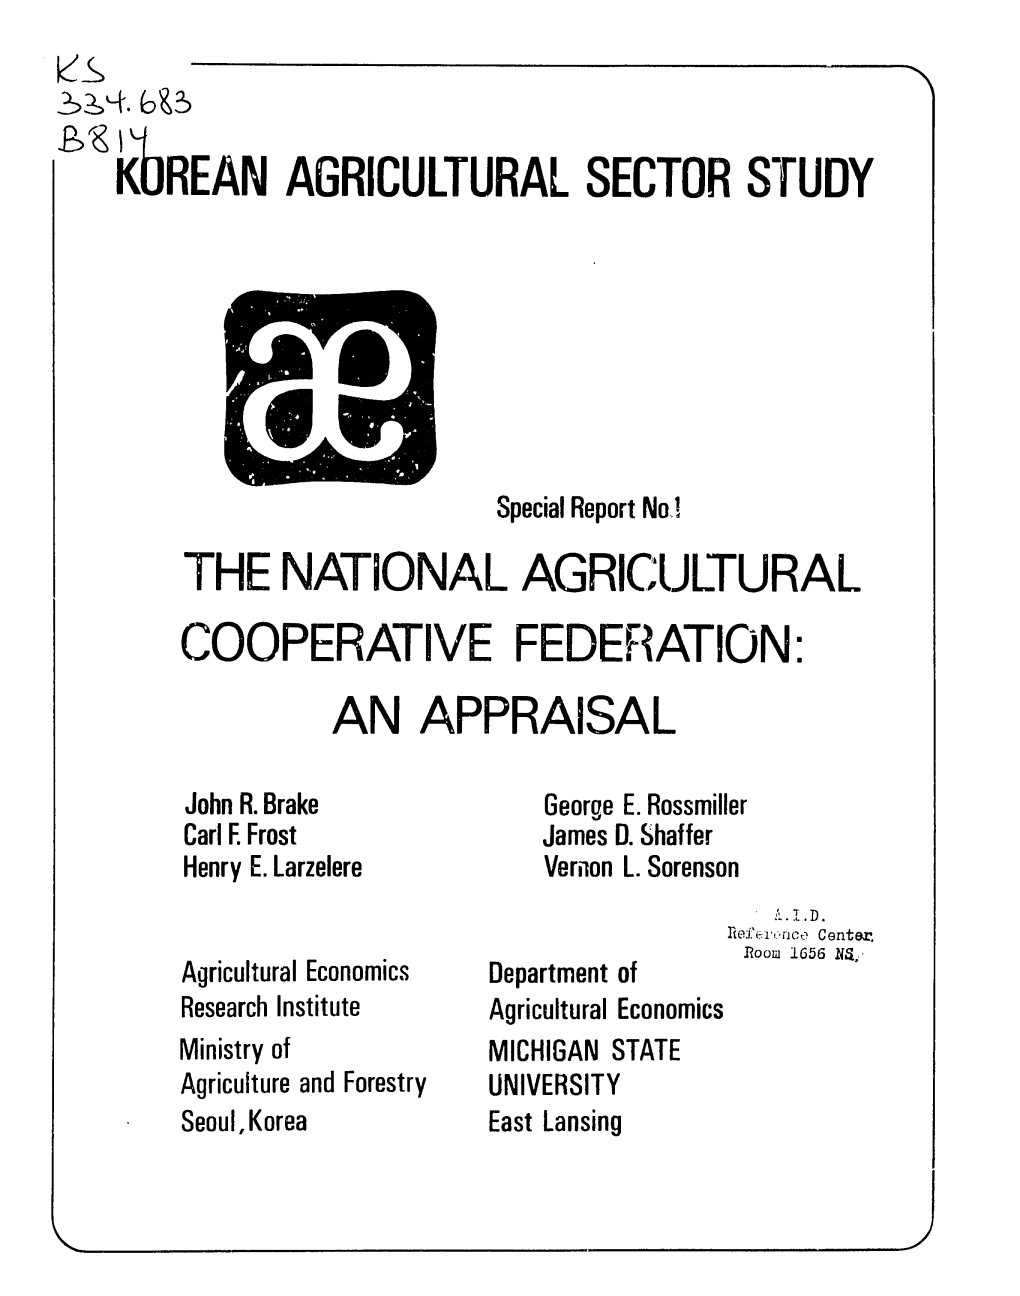 The National Agricultural Cooperative Federation: an Appraisal